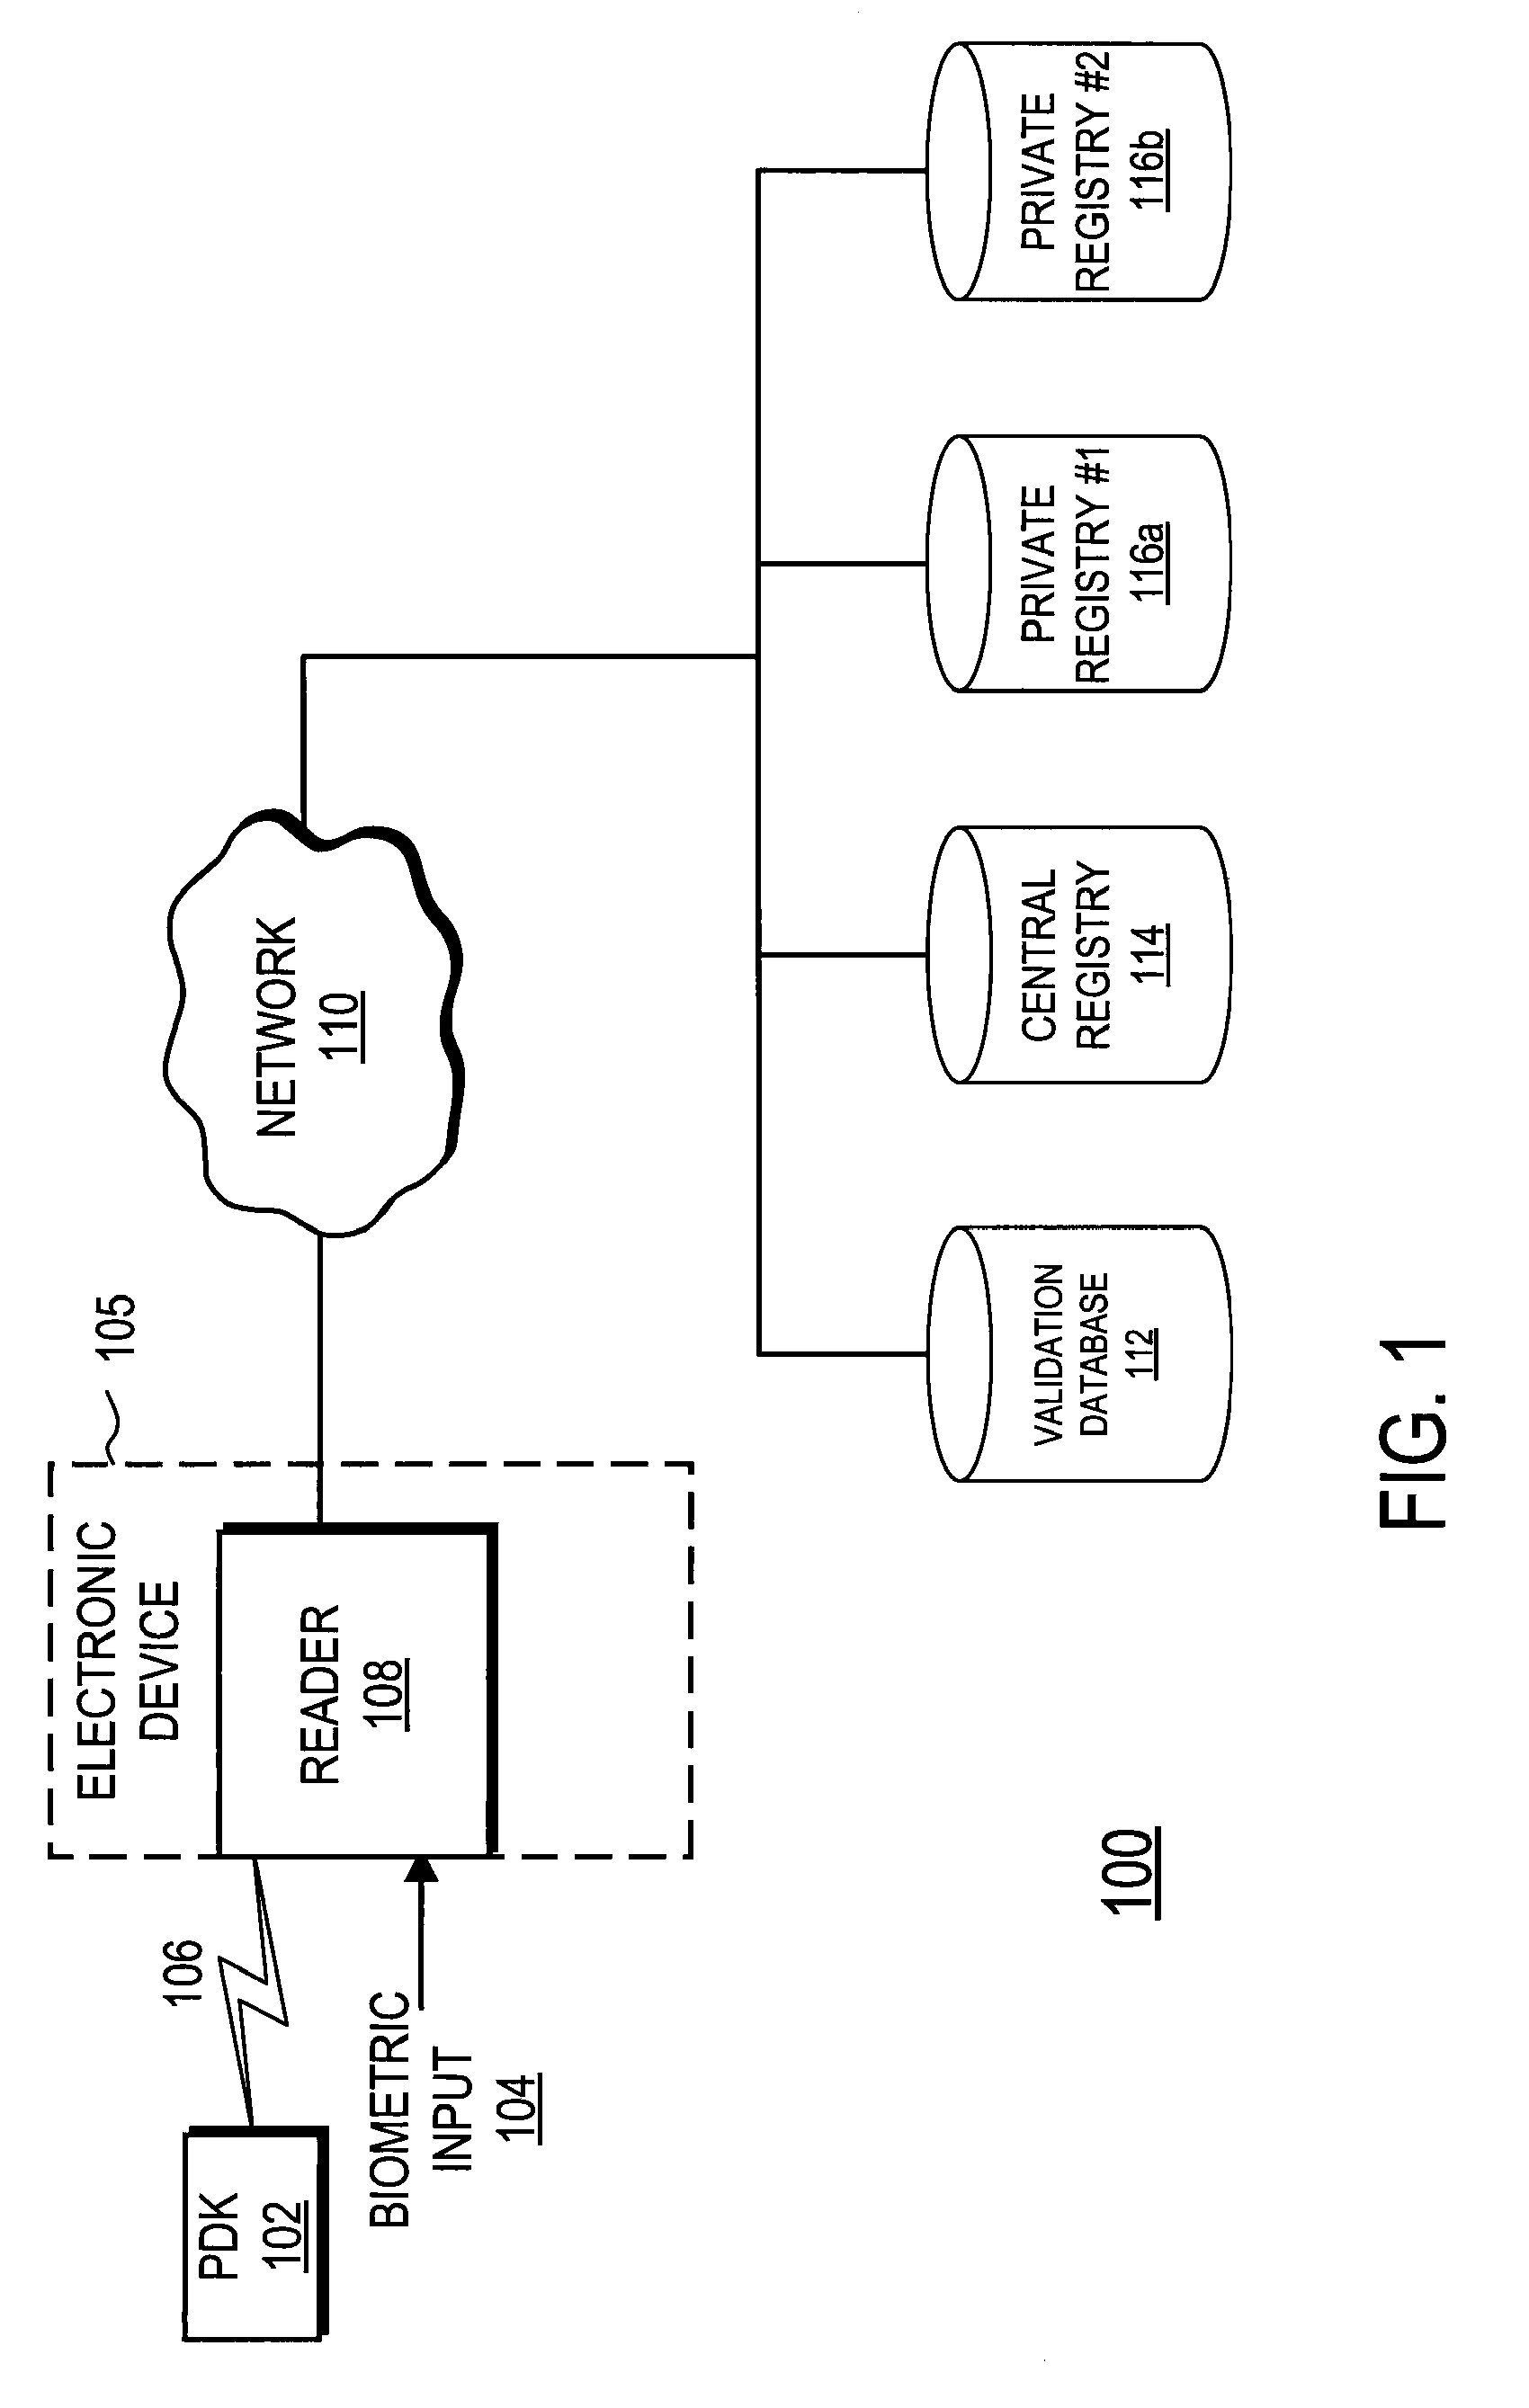 Configuration of Interfaces for a Location Detection System and Application